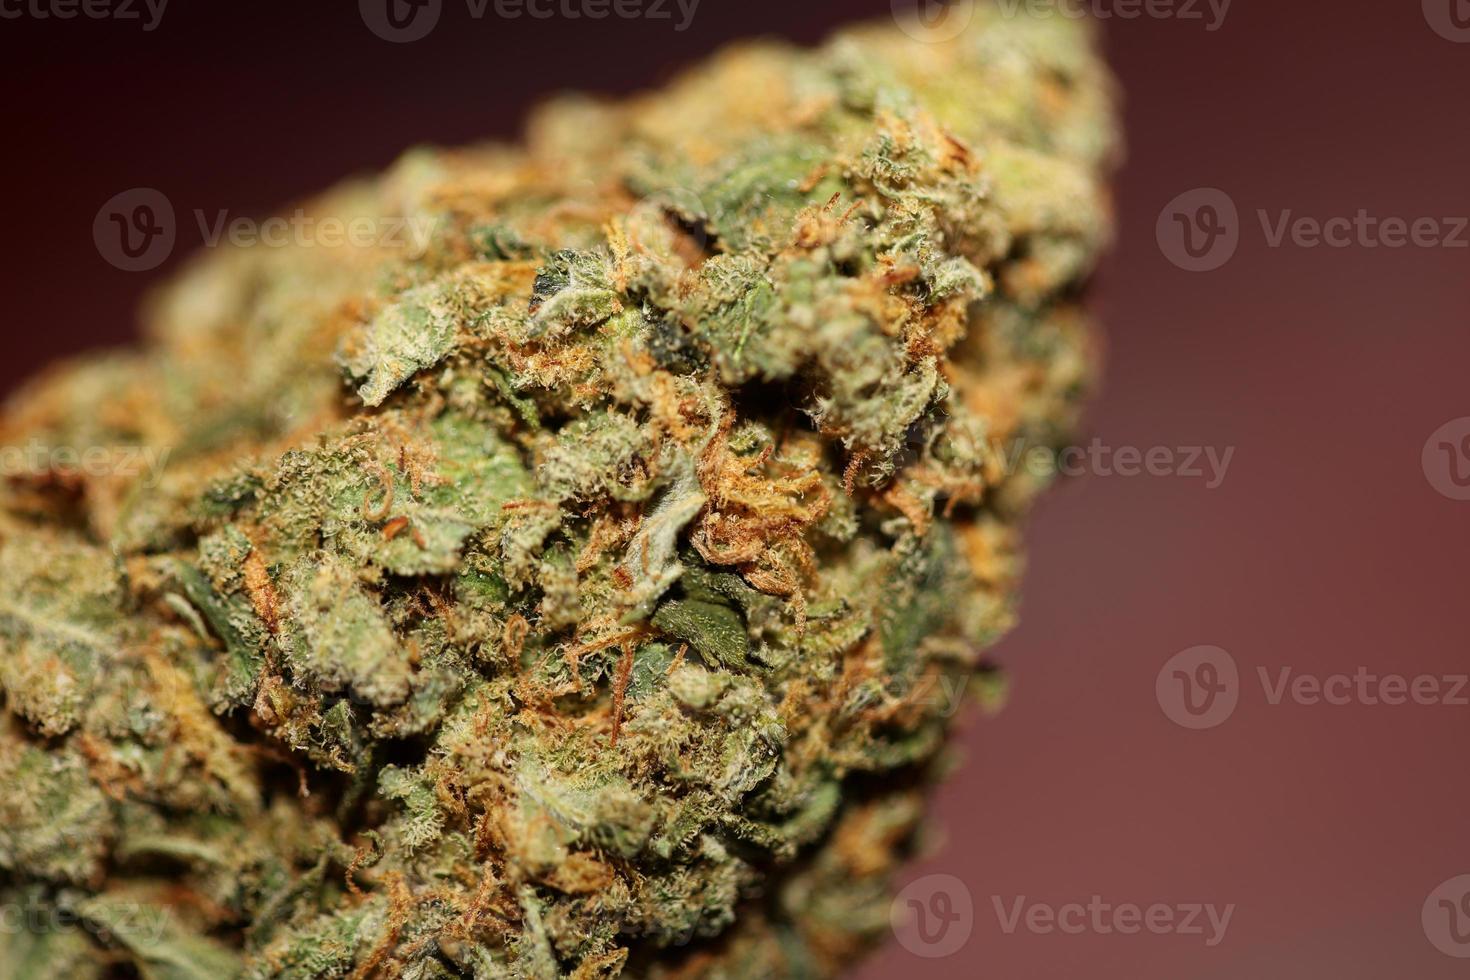 https://static.vecteezy.com/system/resources/previews/018/770/816/non_2x/macro-close-up-of-medical-marijuana-buds-cannabis-ready-for-smoke-concepts-of-herbal-and-alternative-medicine-high-quality-big-size-background-botanical-prints-photo.jpg